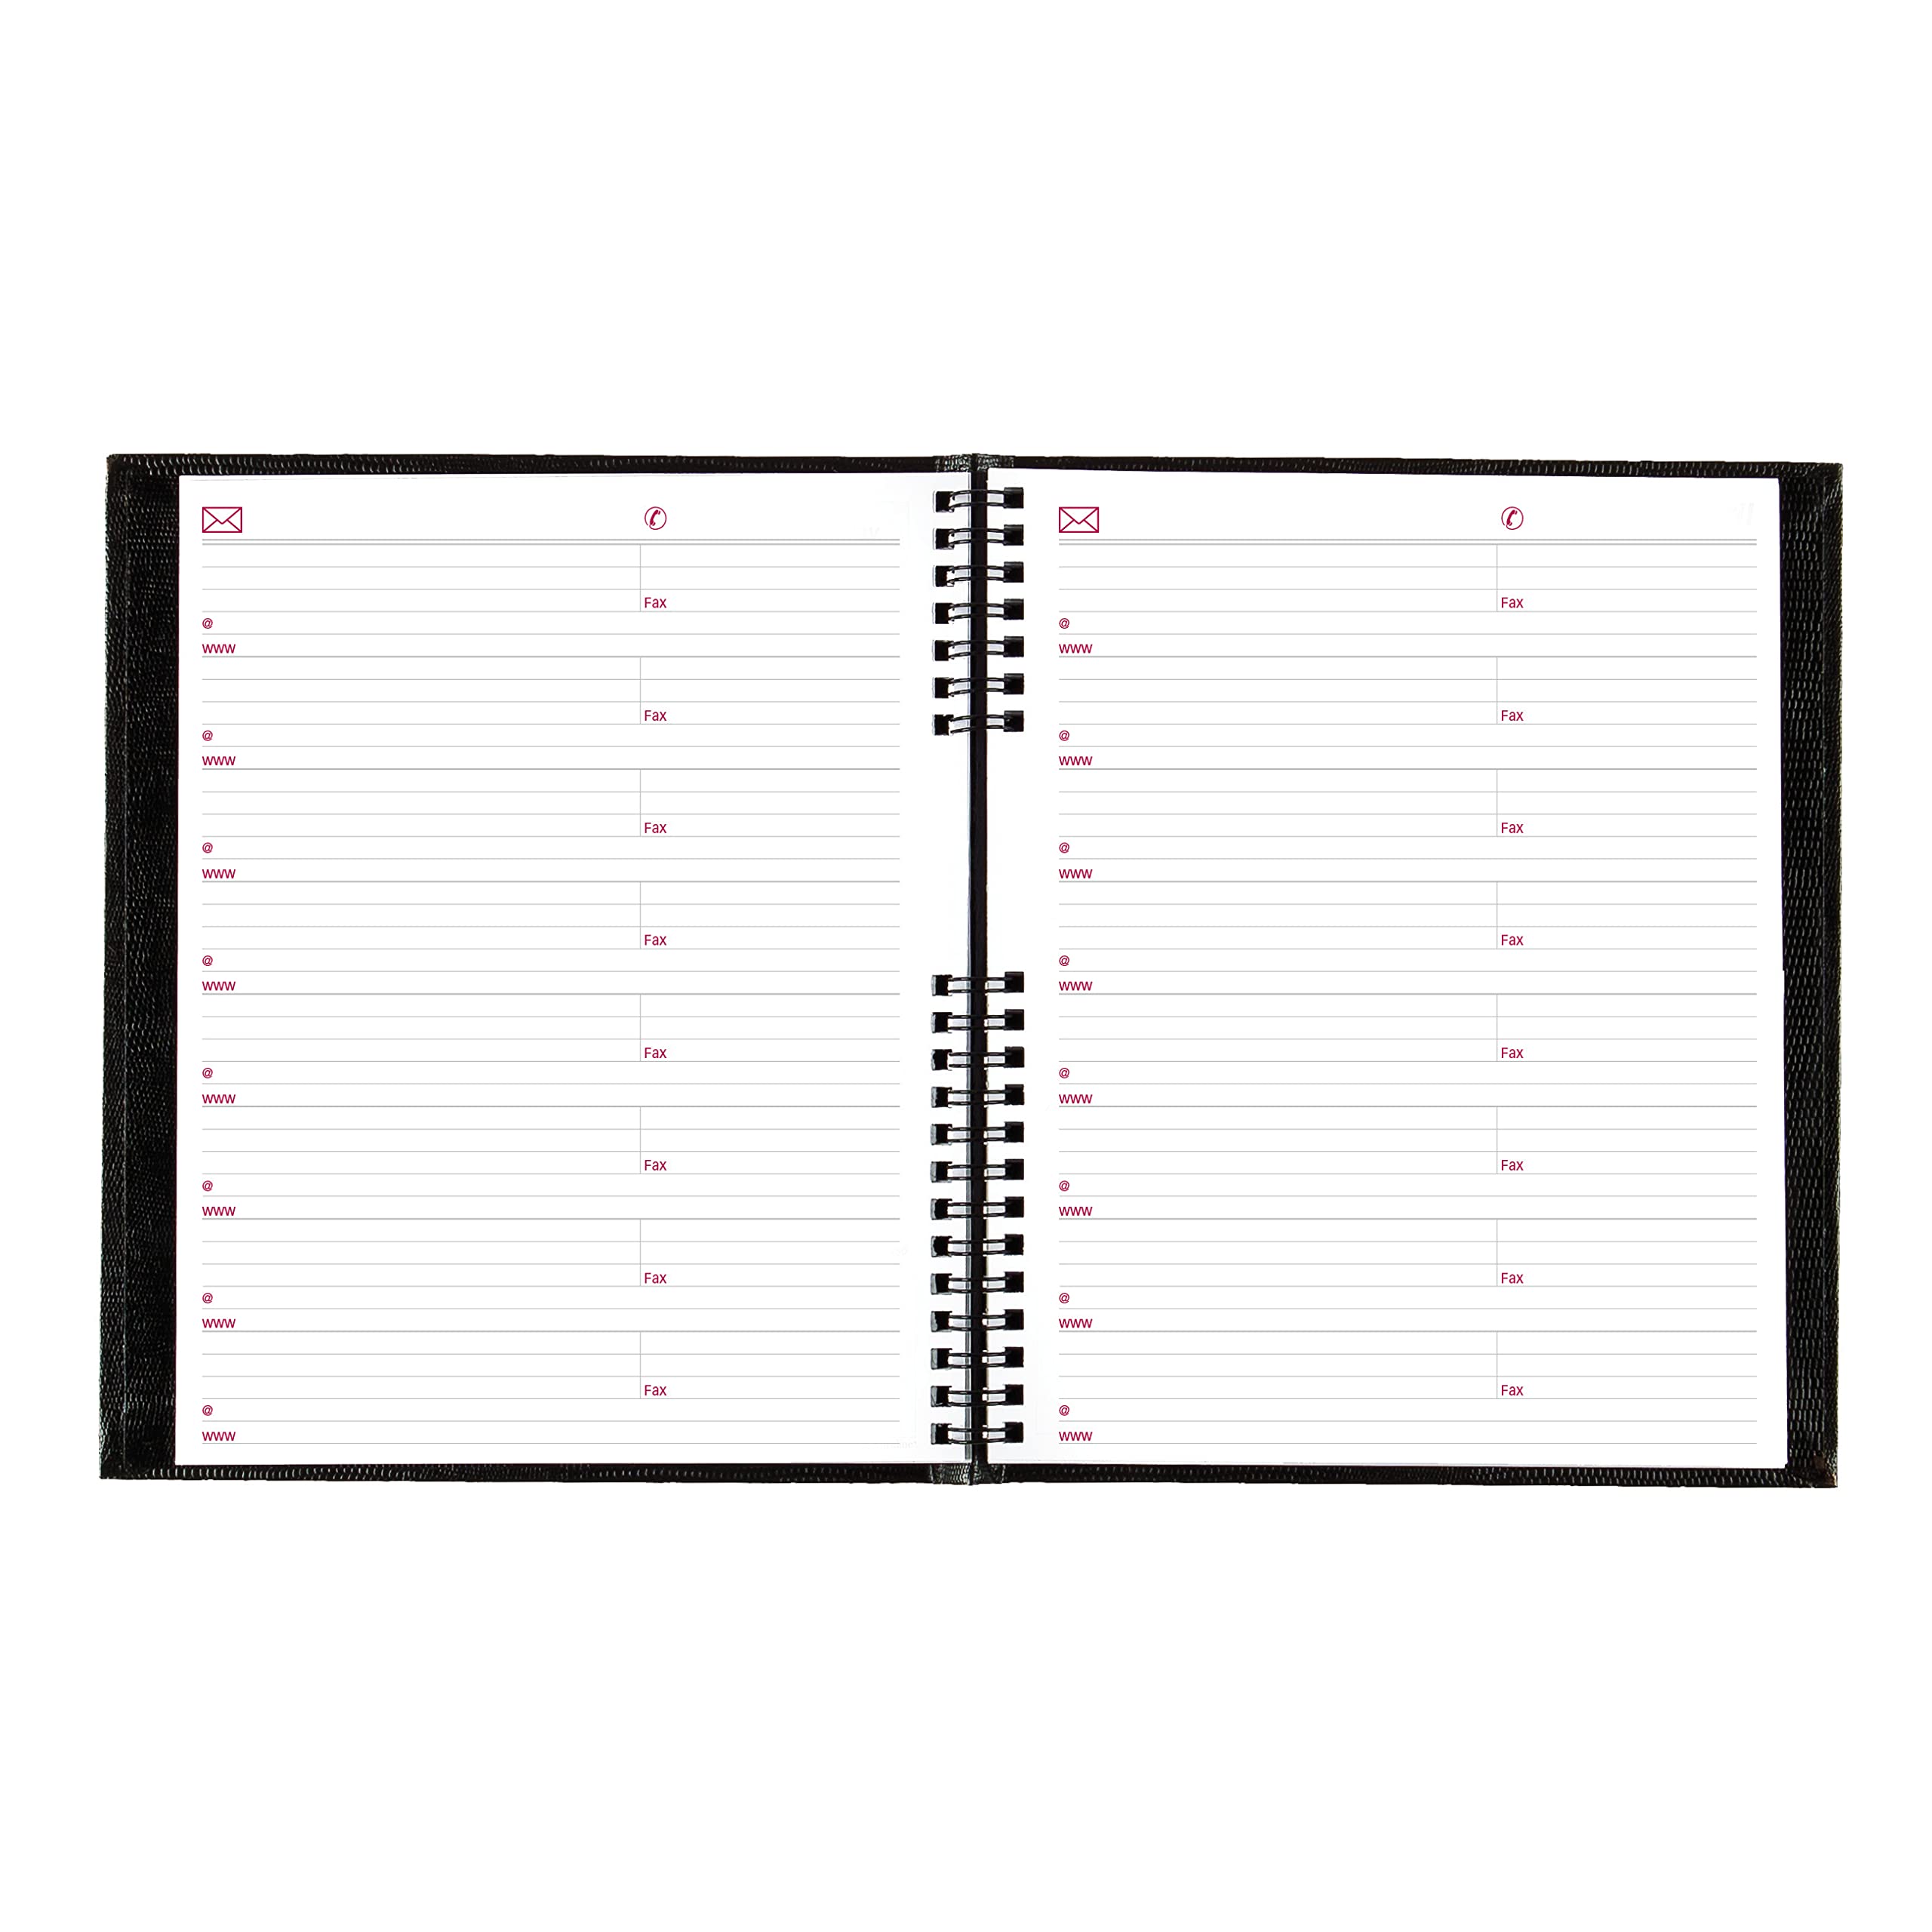 Brownline 2024 Essential Monthly Planner, 14 Months, December 2023 to January 2025, Twin-Wire Binding, 8.875" x 7.125", Mountain Green (CB1200G.03-24)